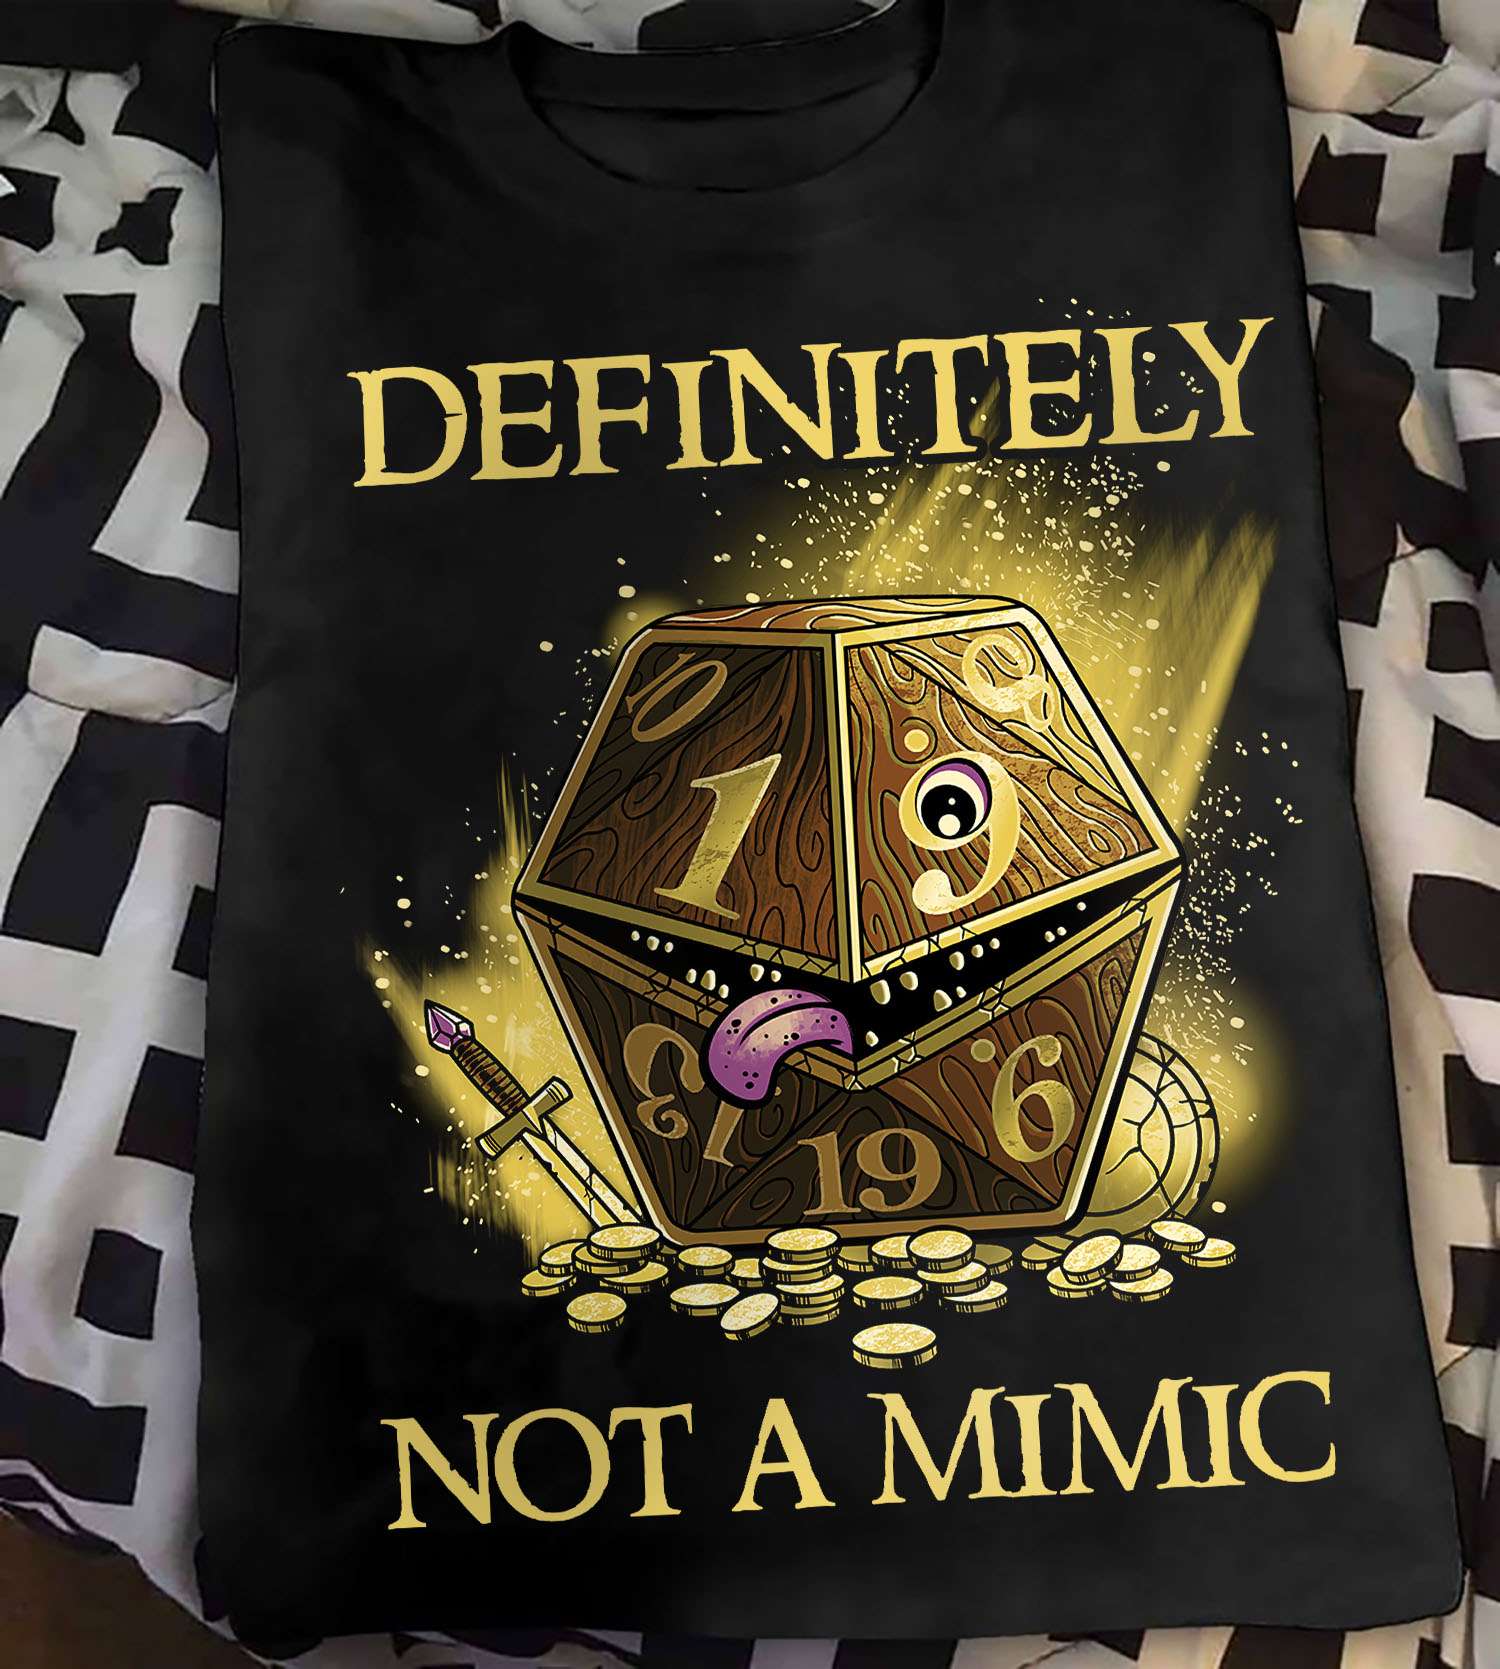 Dice Monster - Definitely not a mimic